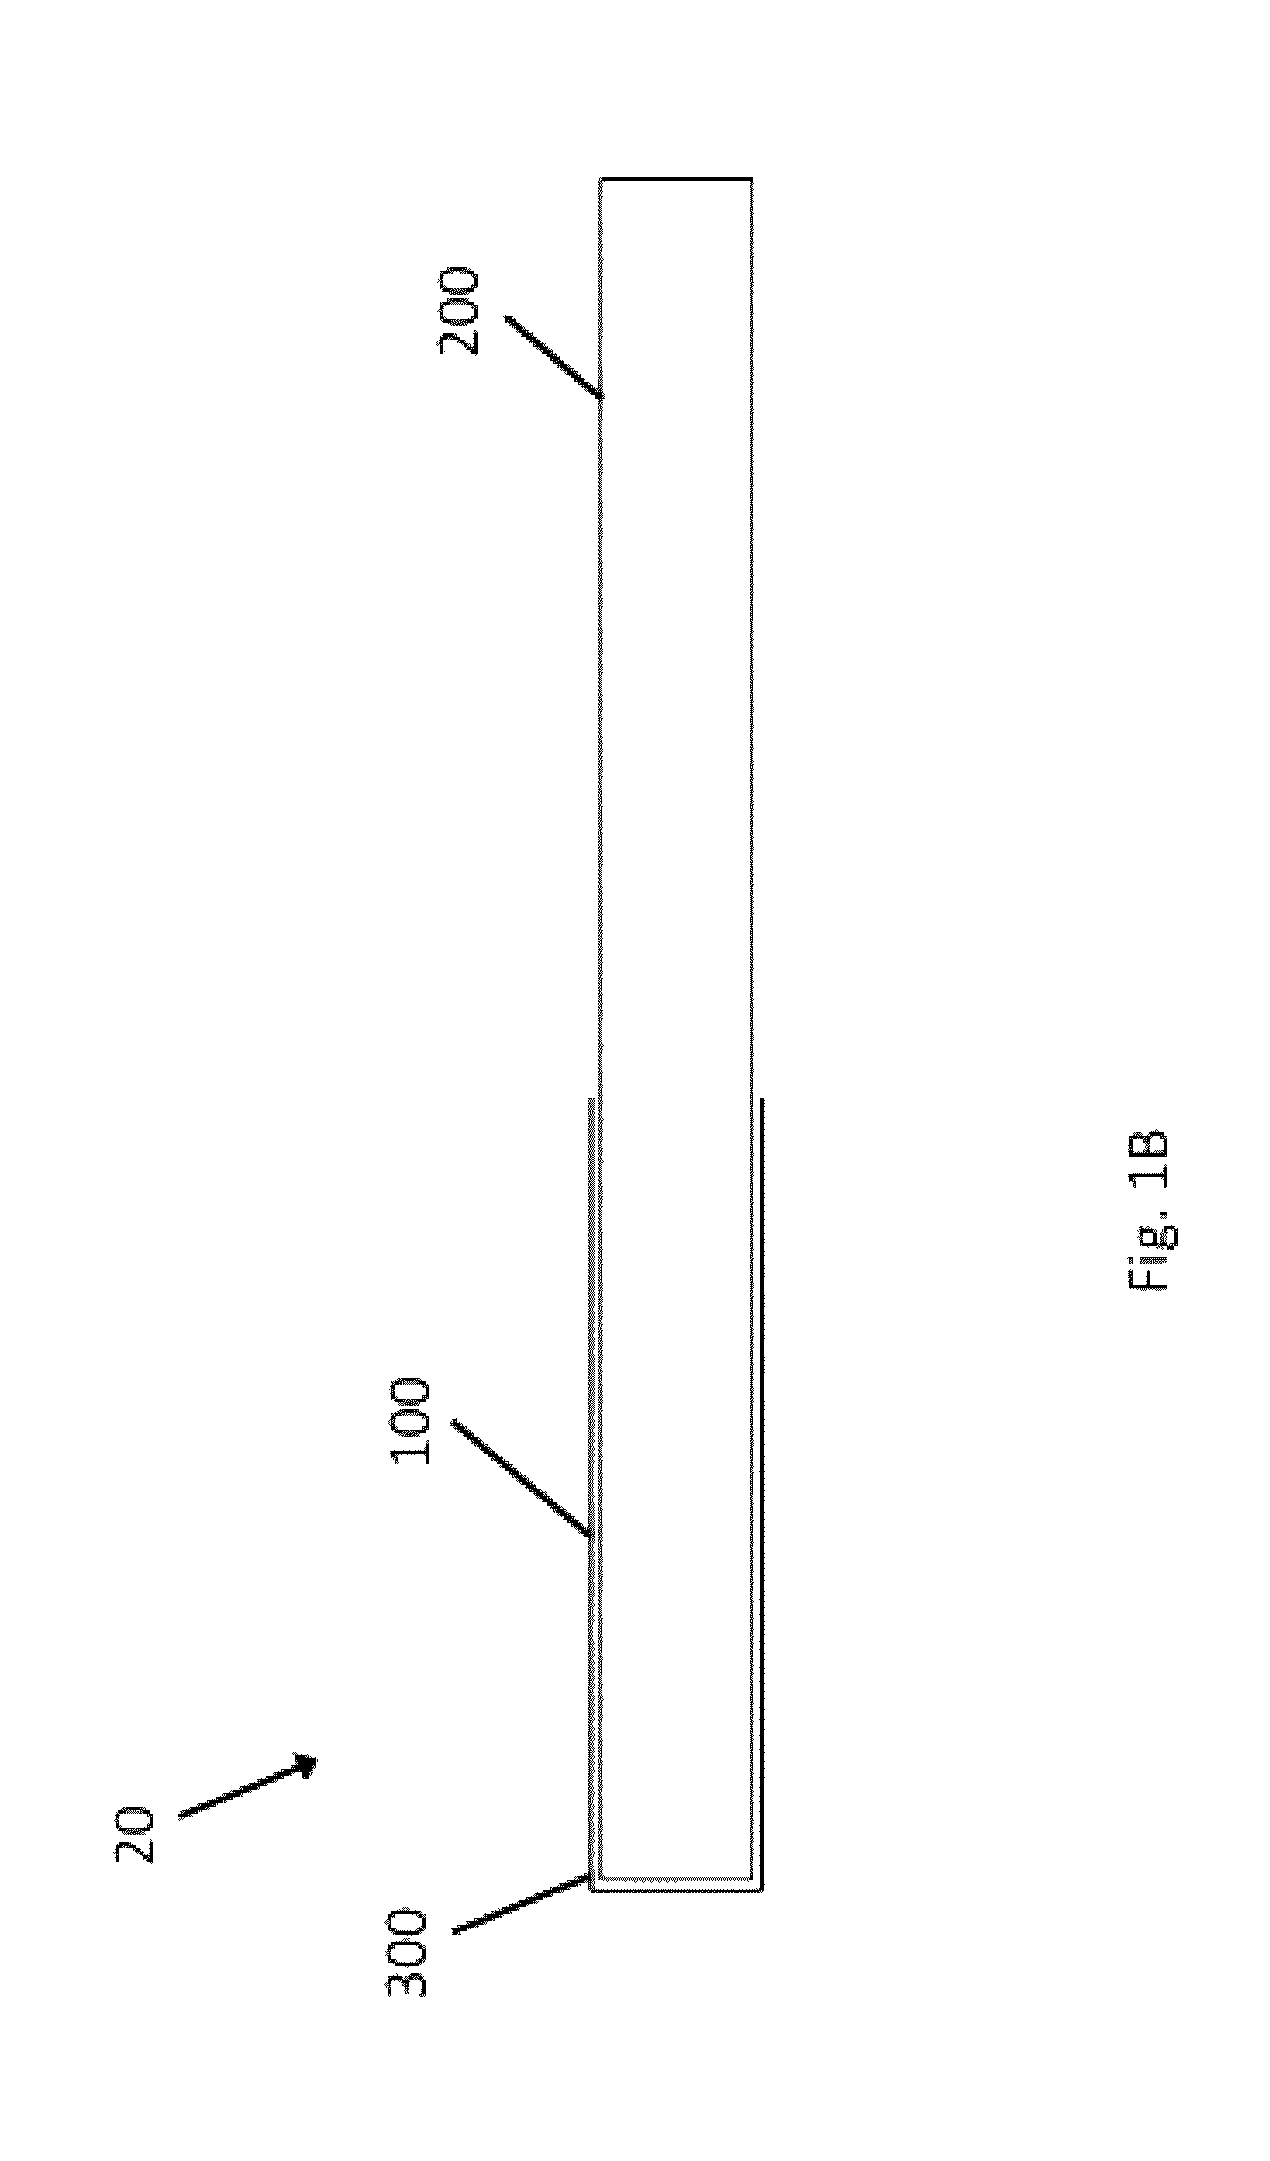 Flow diverting devices